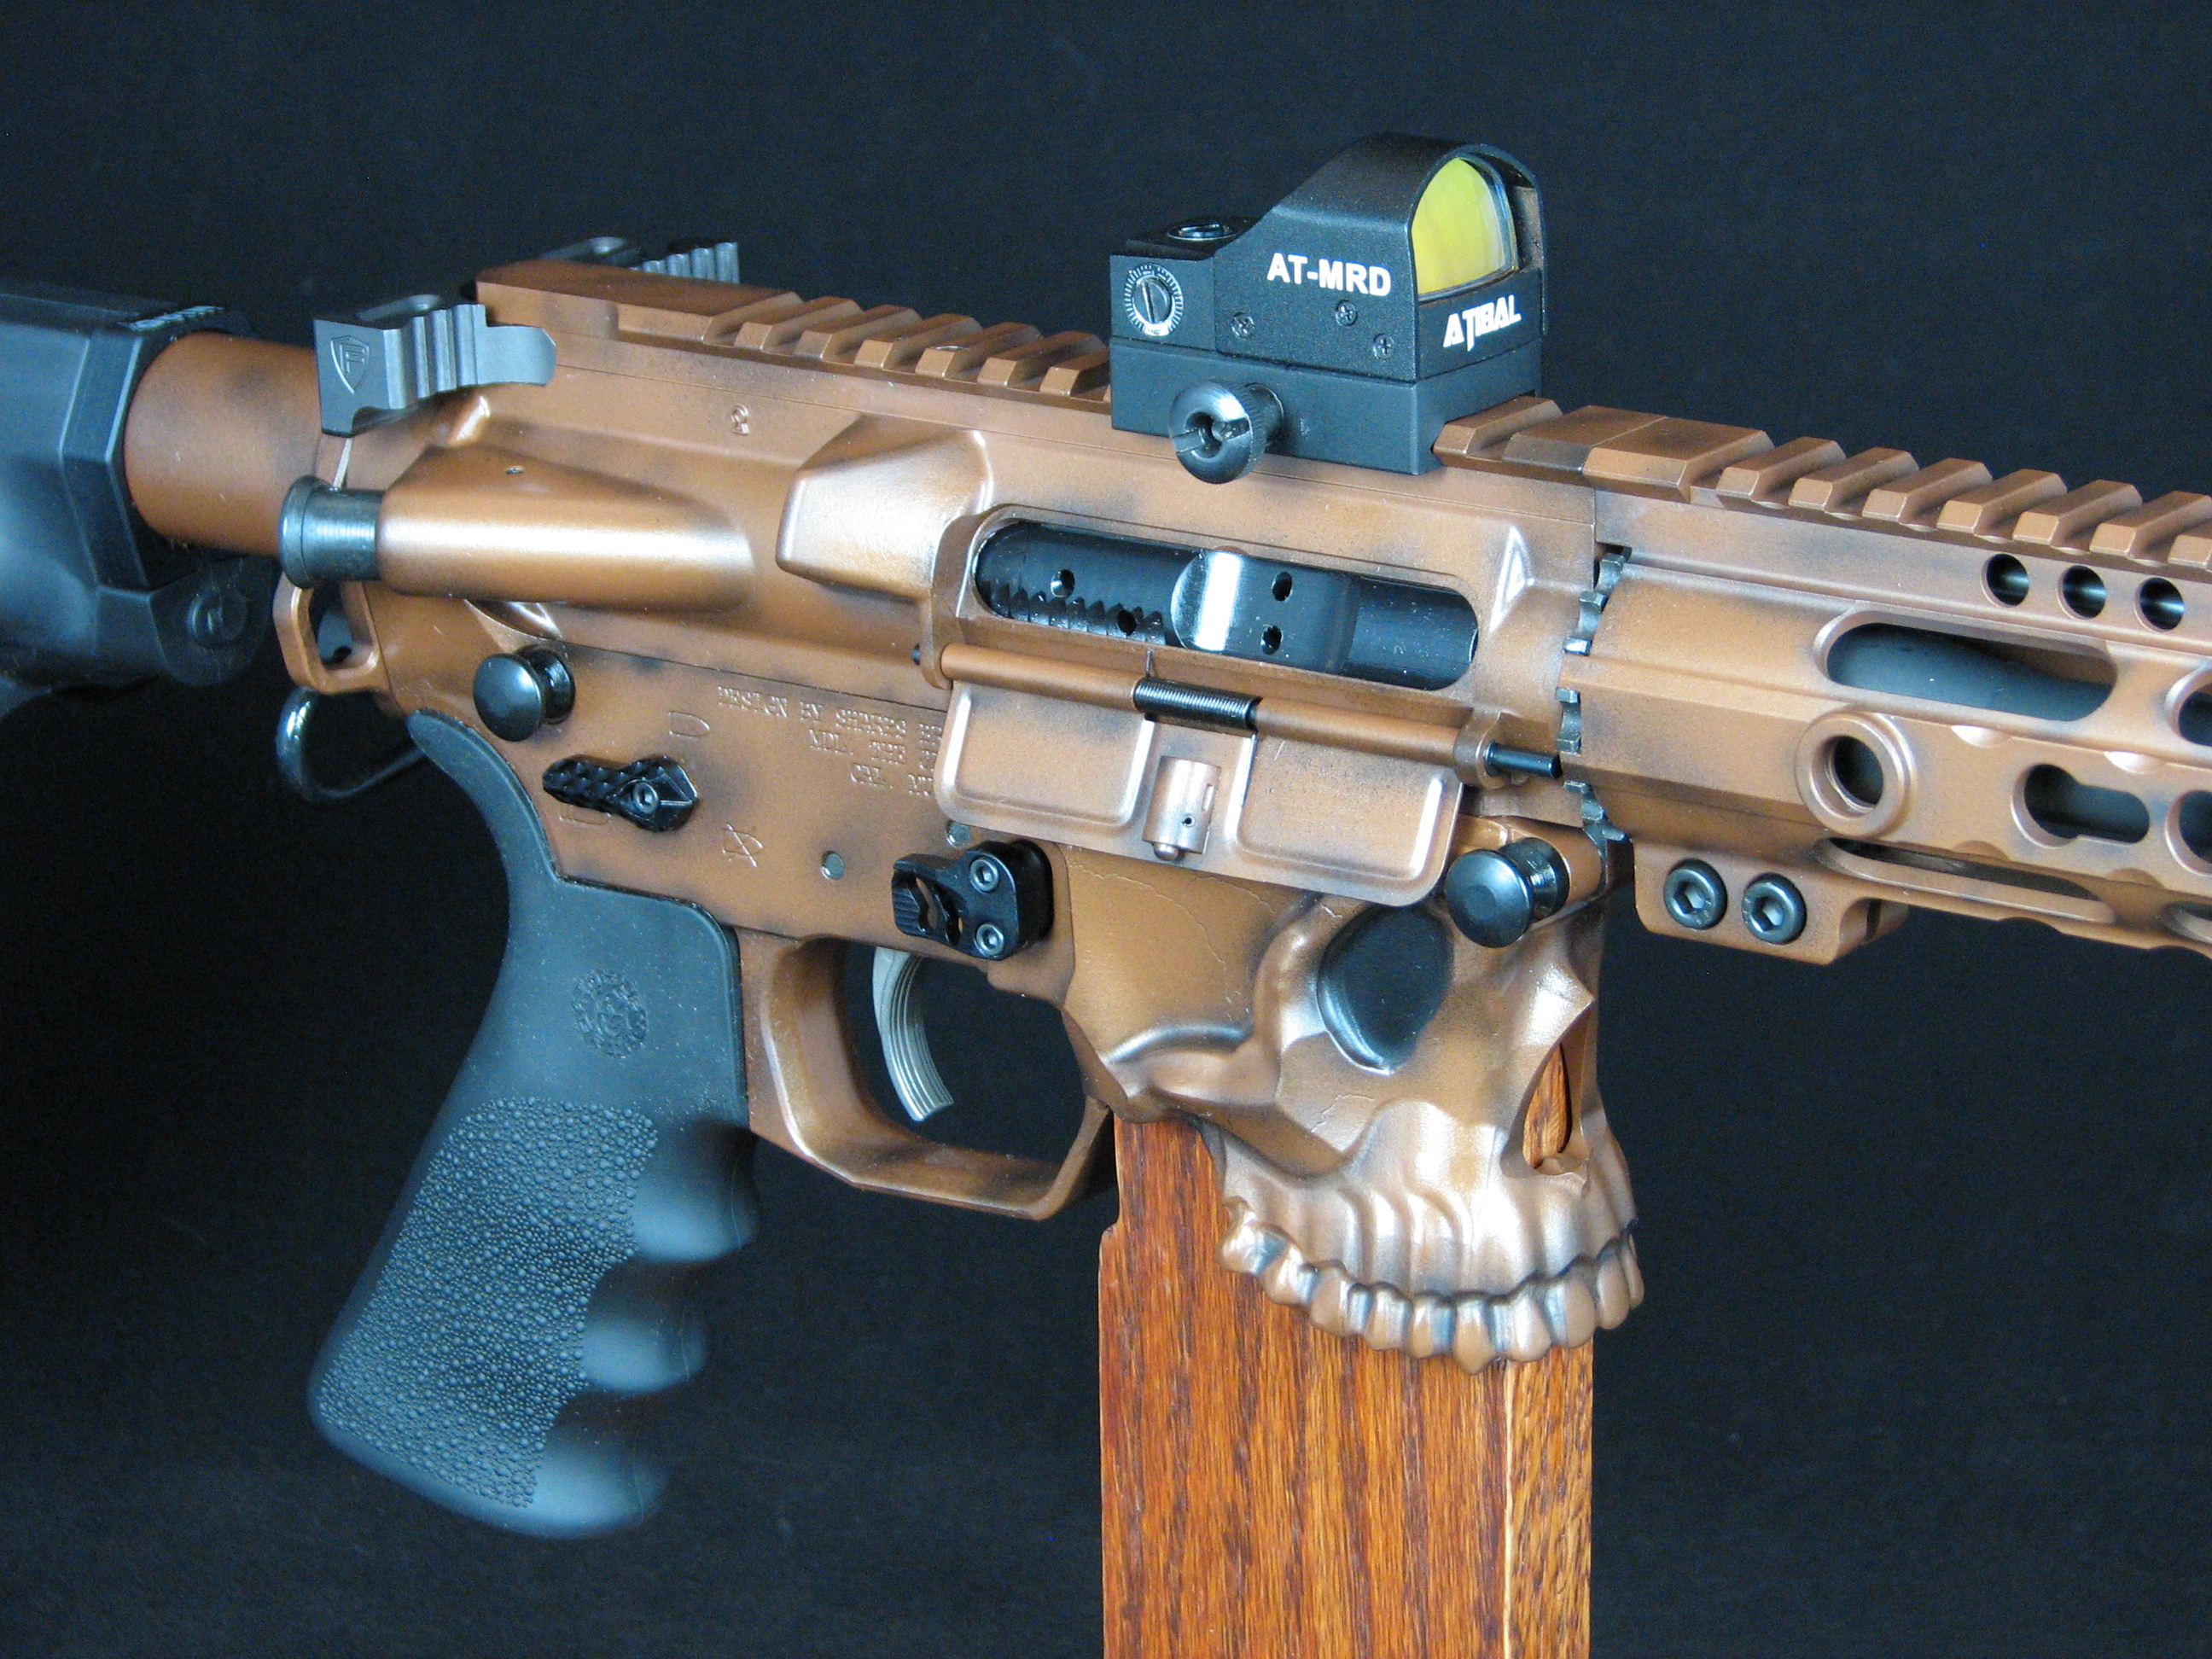 Custom AR-15 5.56 Pistol * Copper DuraCoat Finish with Dusted Black Accents...